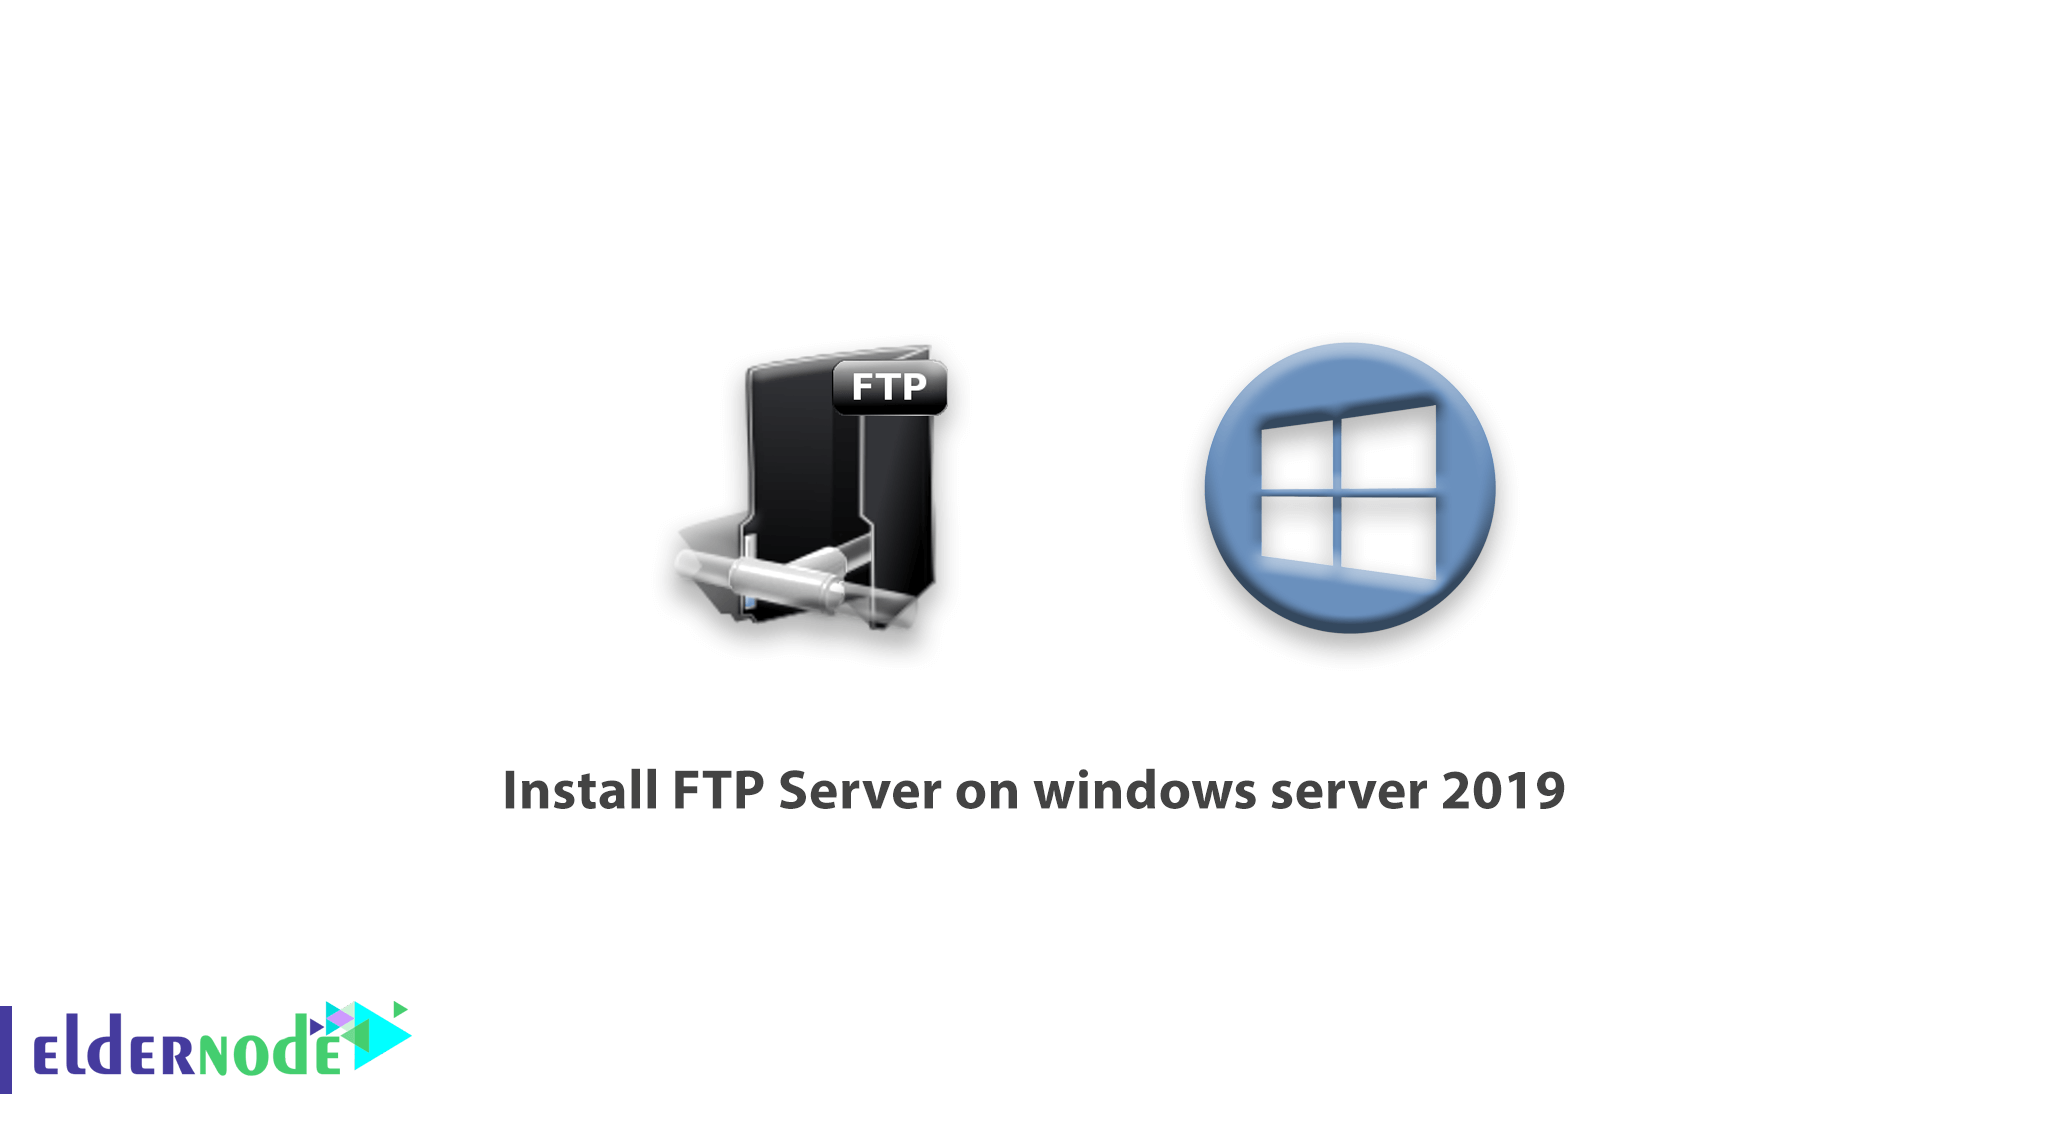 How to install FTP Server on windows server 2019